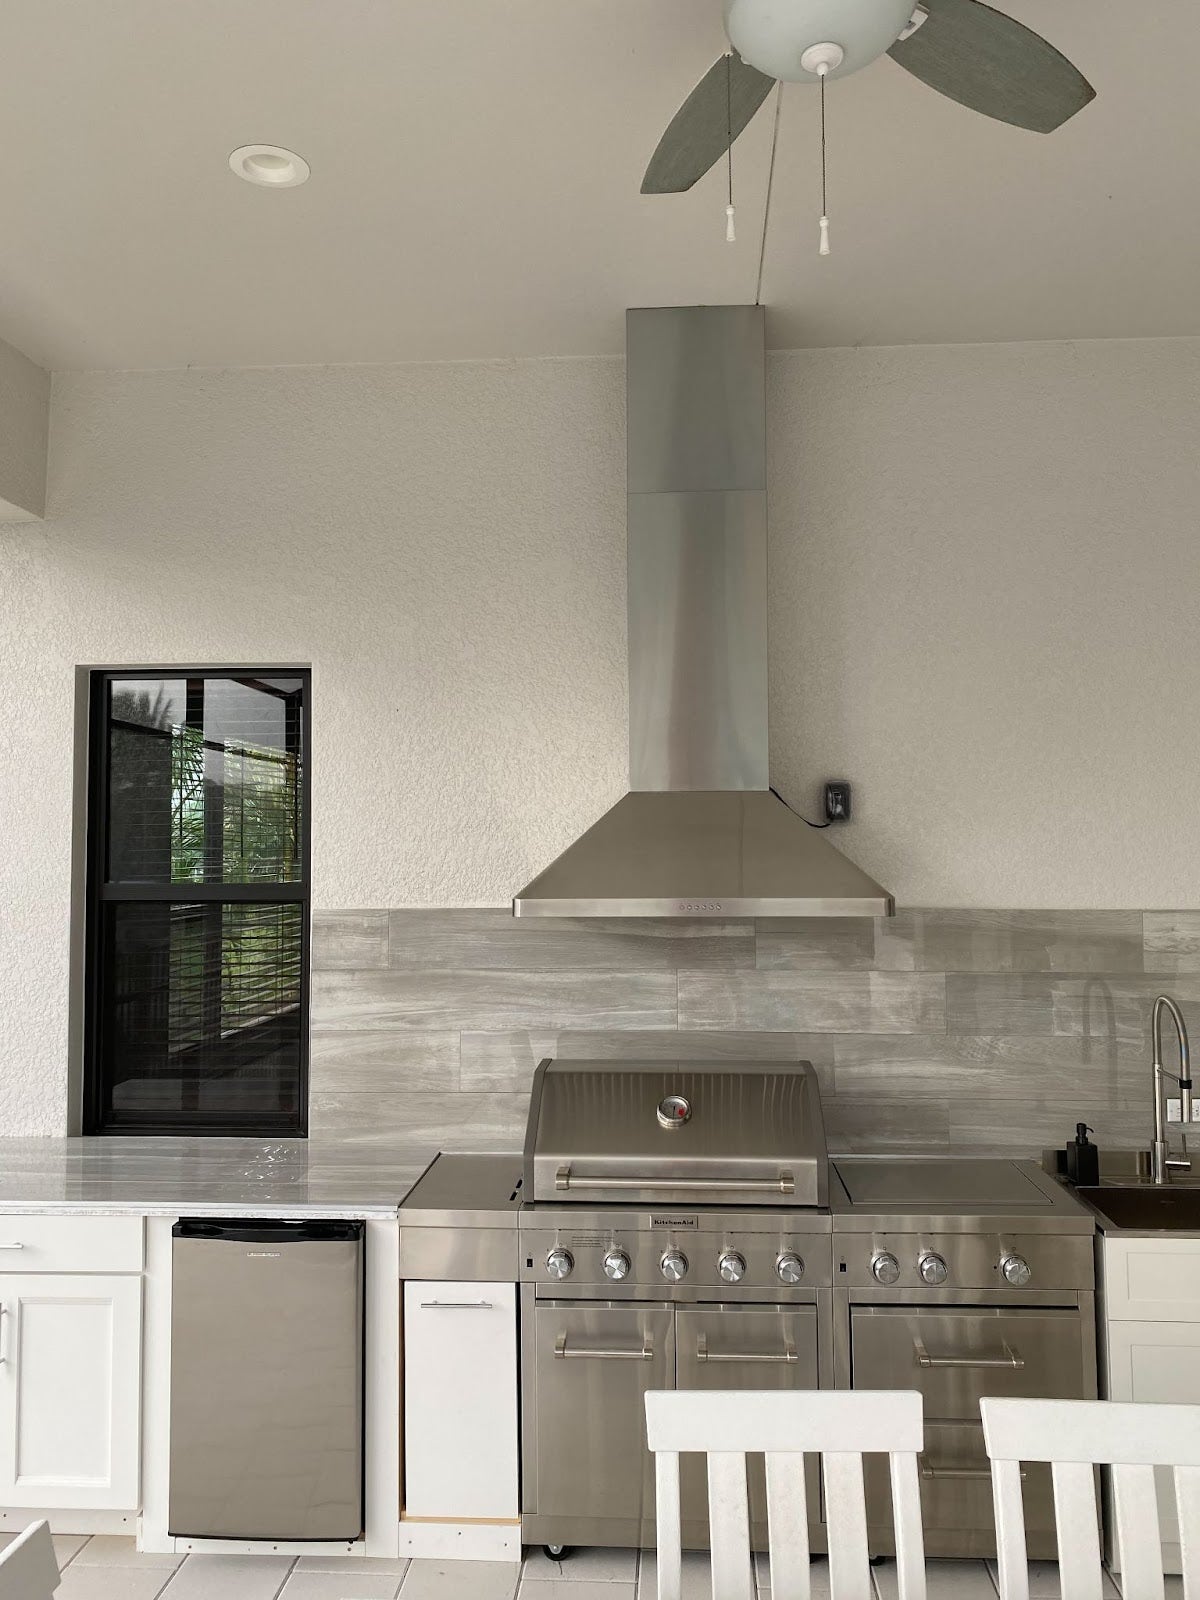 Modern Minimalist Outdoor Kitchen: Proline PLJW 129 hood complements the clean lines and contemporary feel of this sleek outdoor kitchen. The gray and white palette creates a trendy space for functional and uncluttered cooking. - Proline Range Hoods - prolinerangehoods.com 